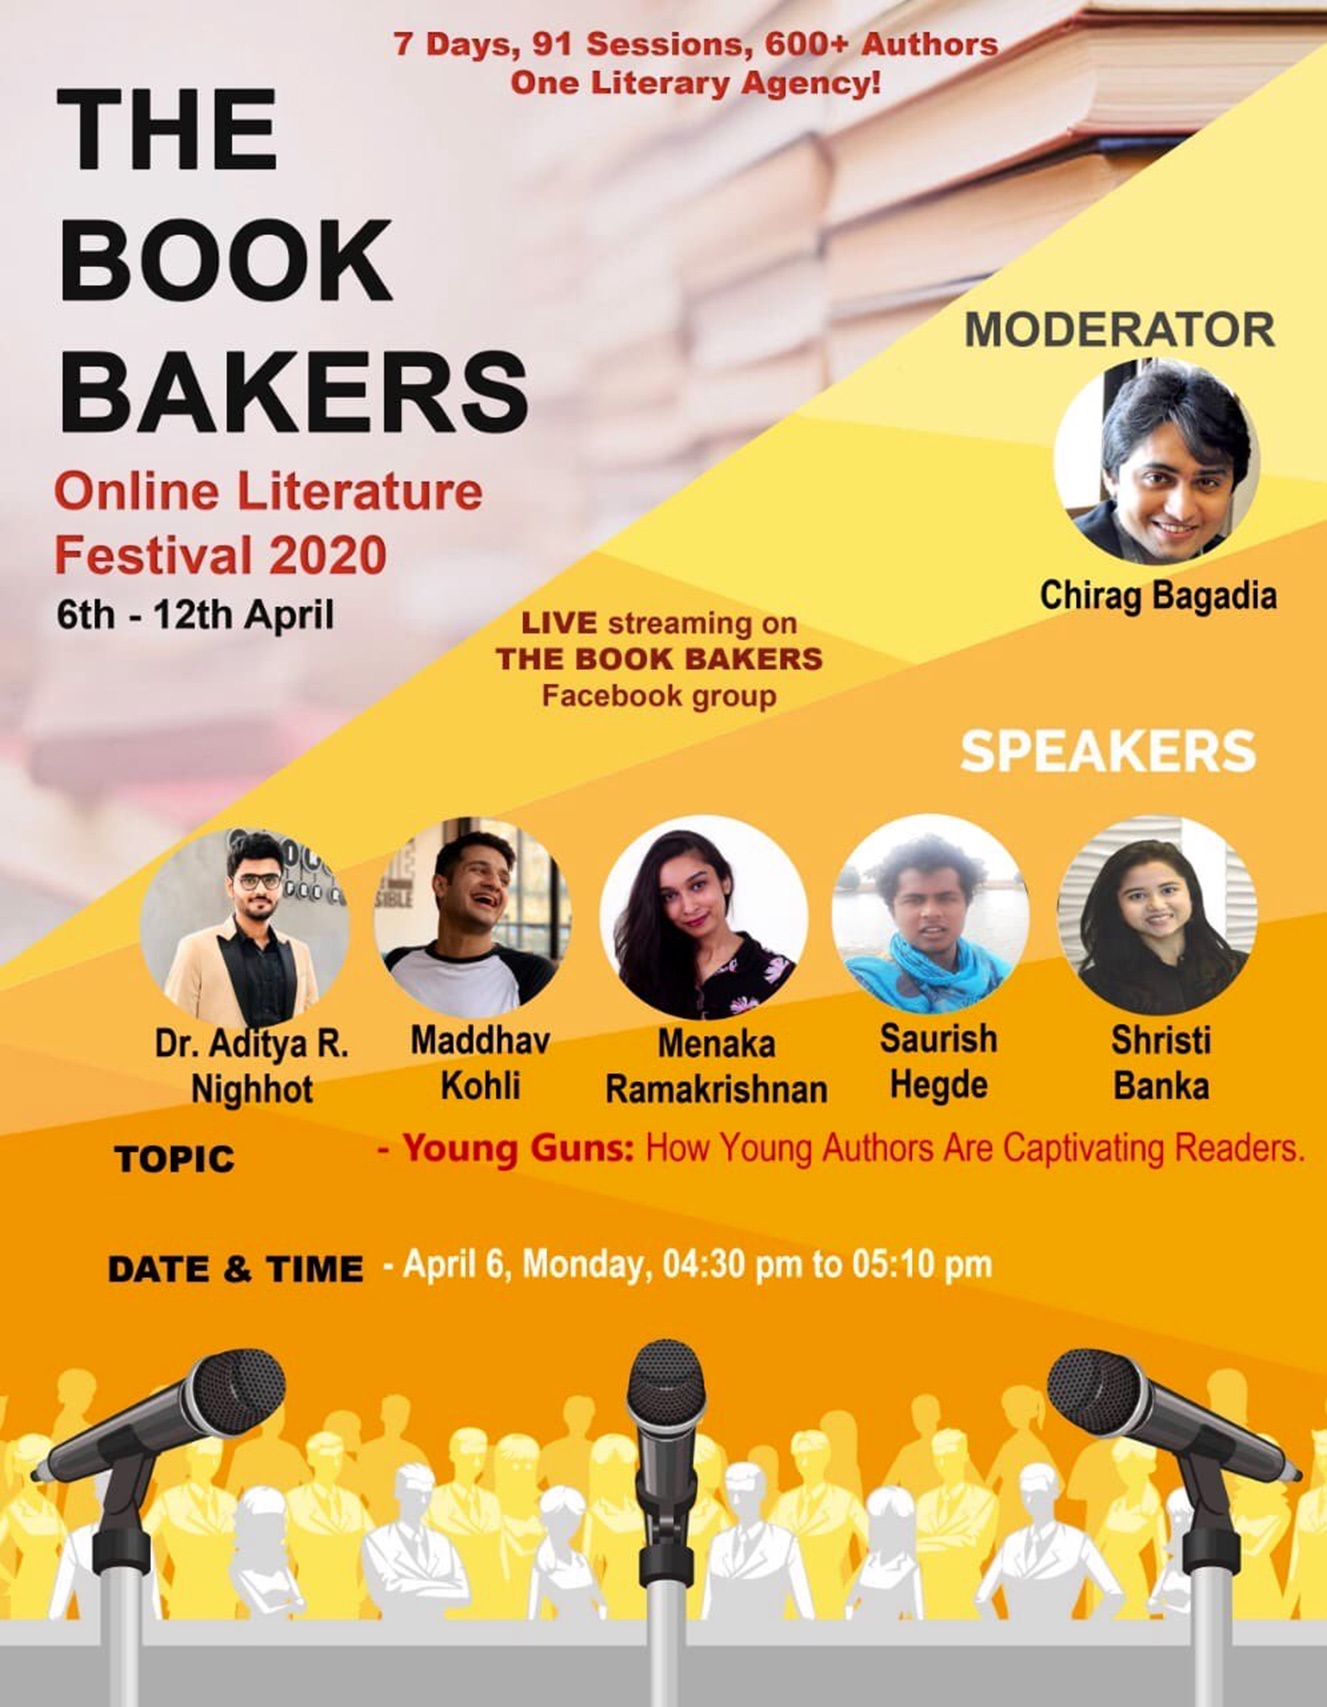 The Book Bakers